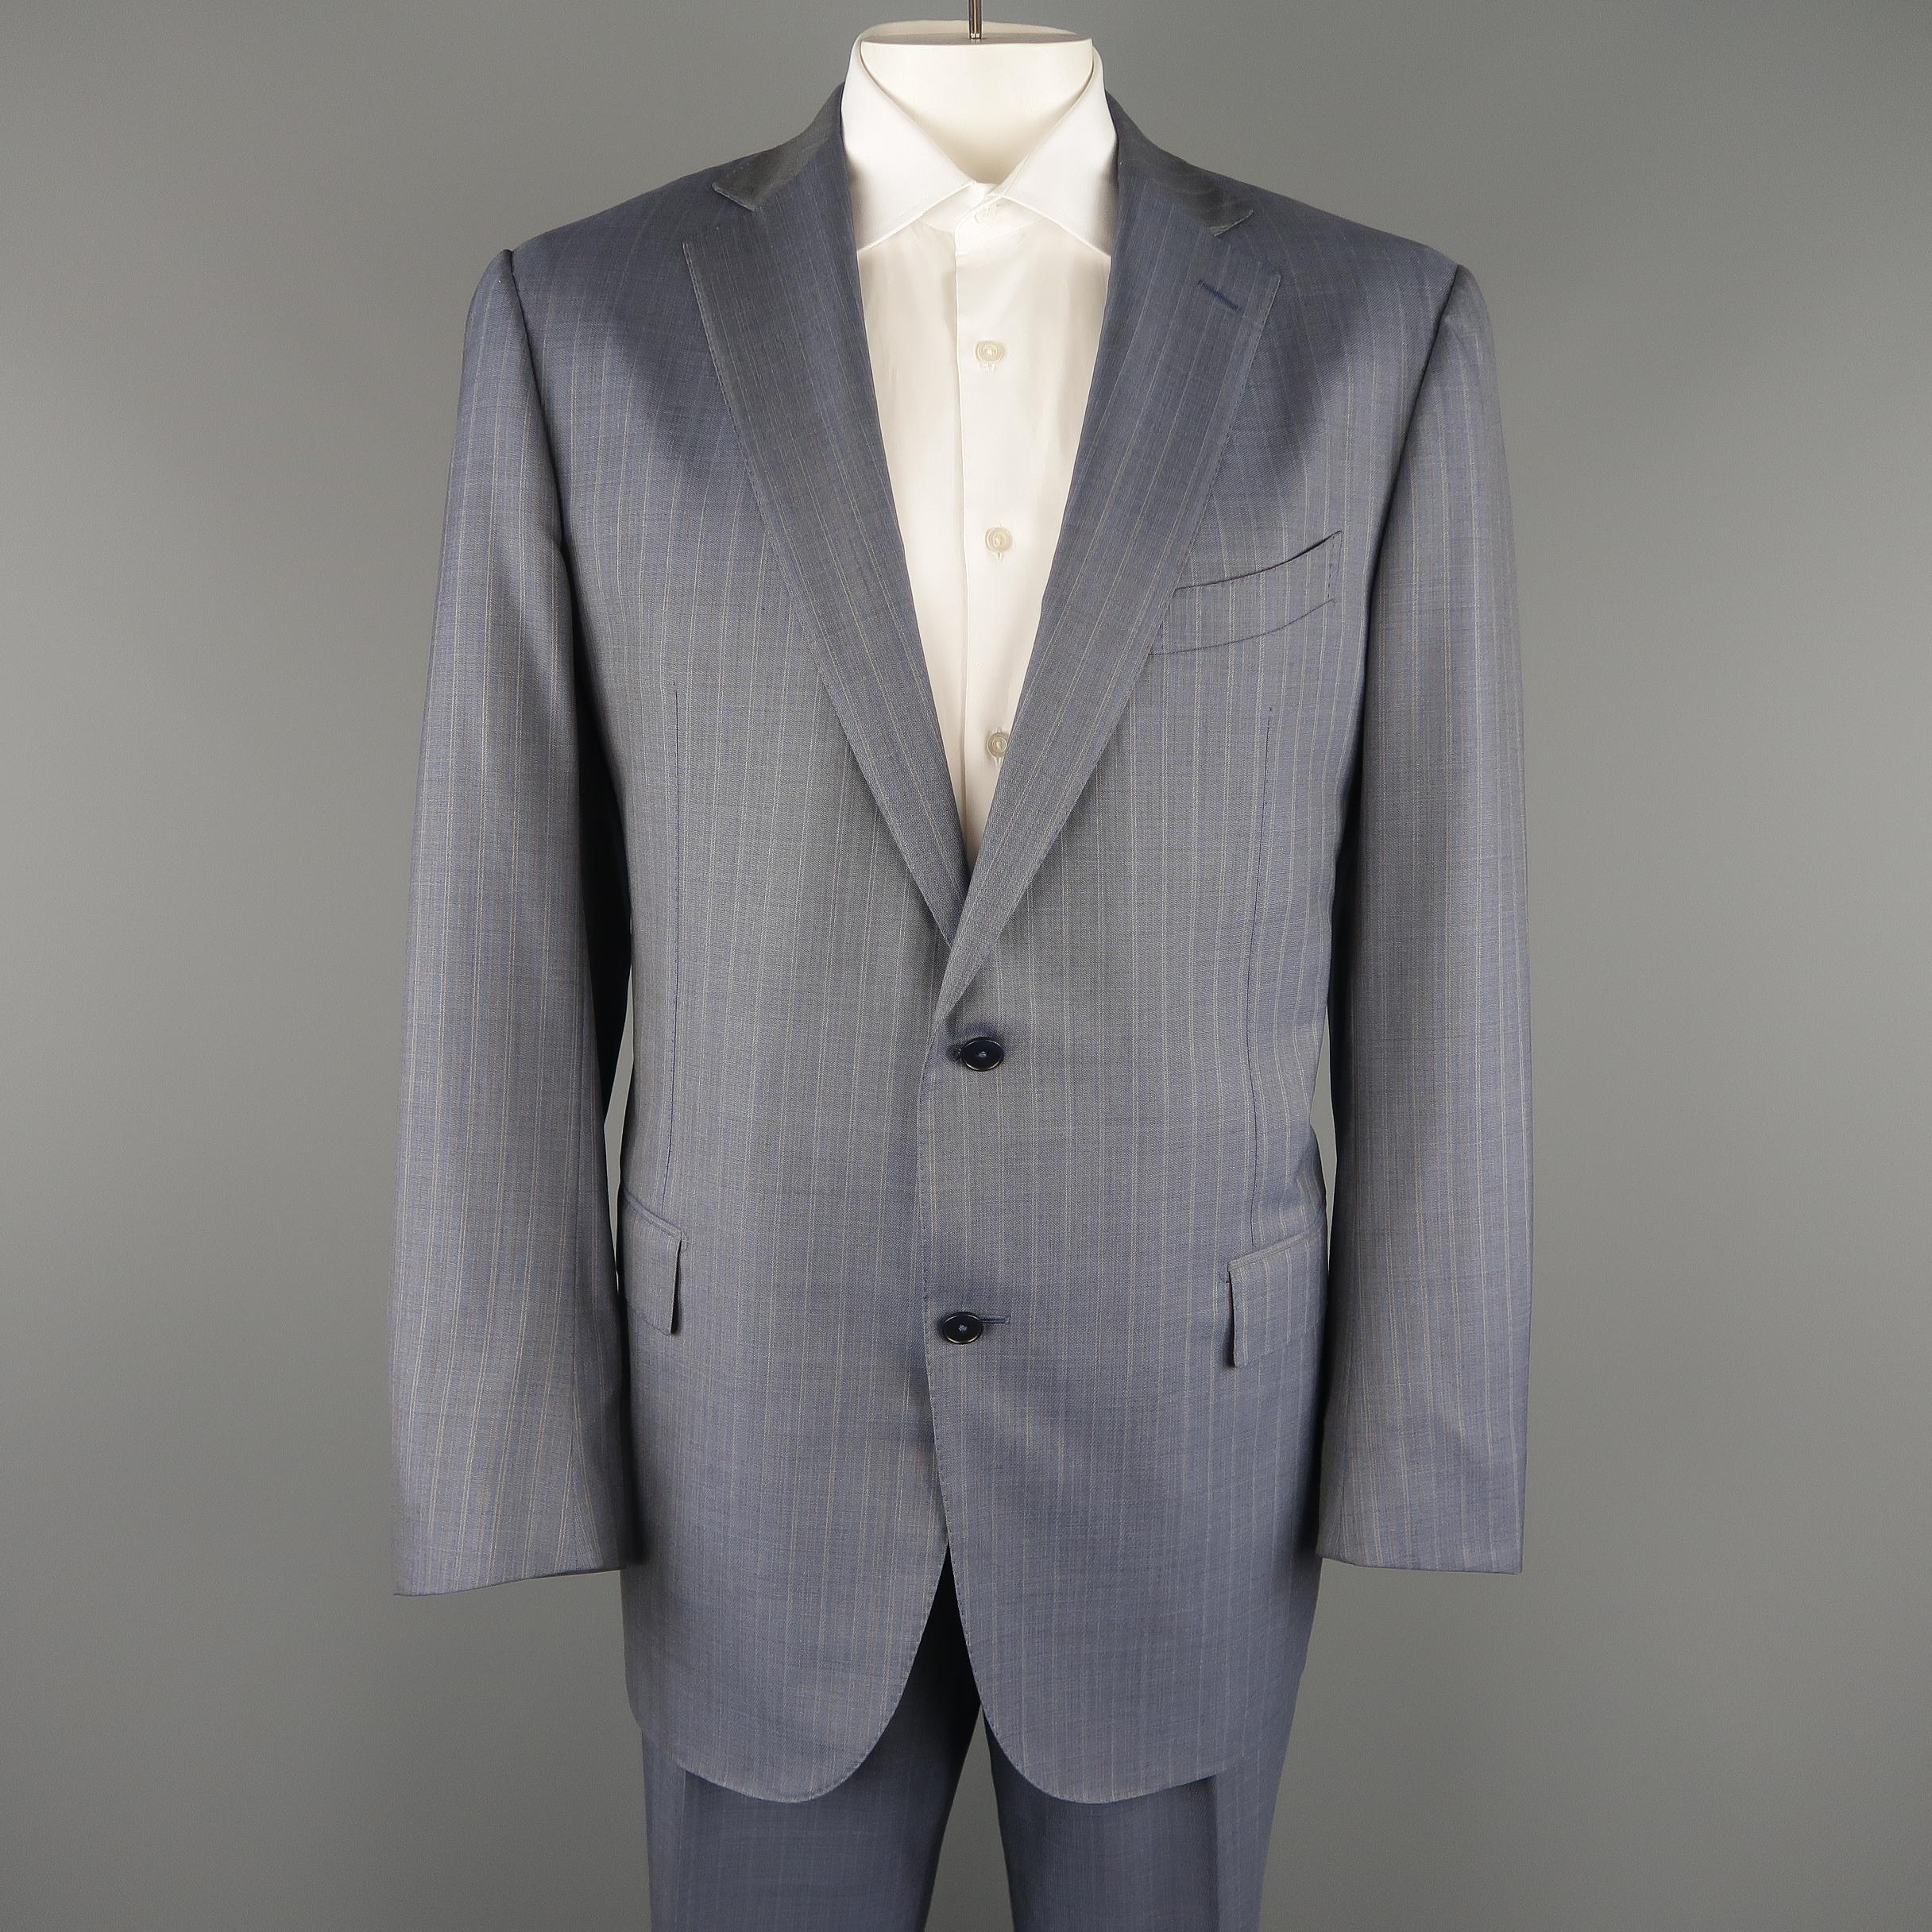 ERMENEGILDO ZEGNA two piece suit comes in muted blue pinstriped wool and includes a single breasted, notch lapel, two button sport coat with functional button cuffs and silk lining with matching flat front trousers. 

Made in Switzerland. 
Excellent